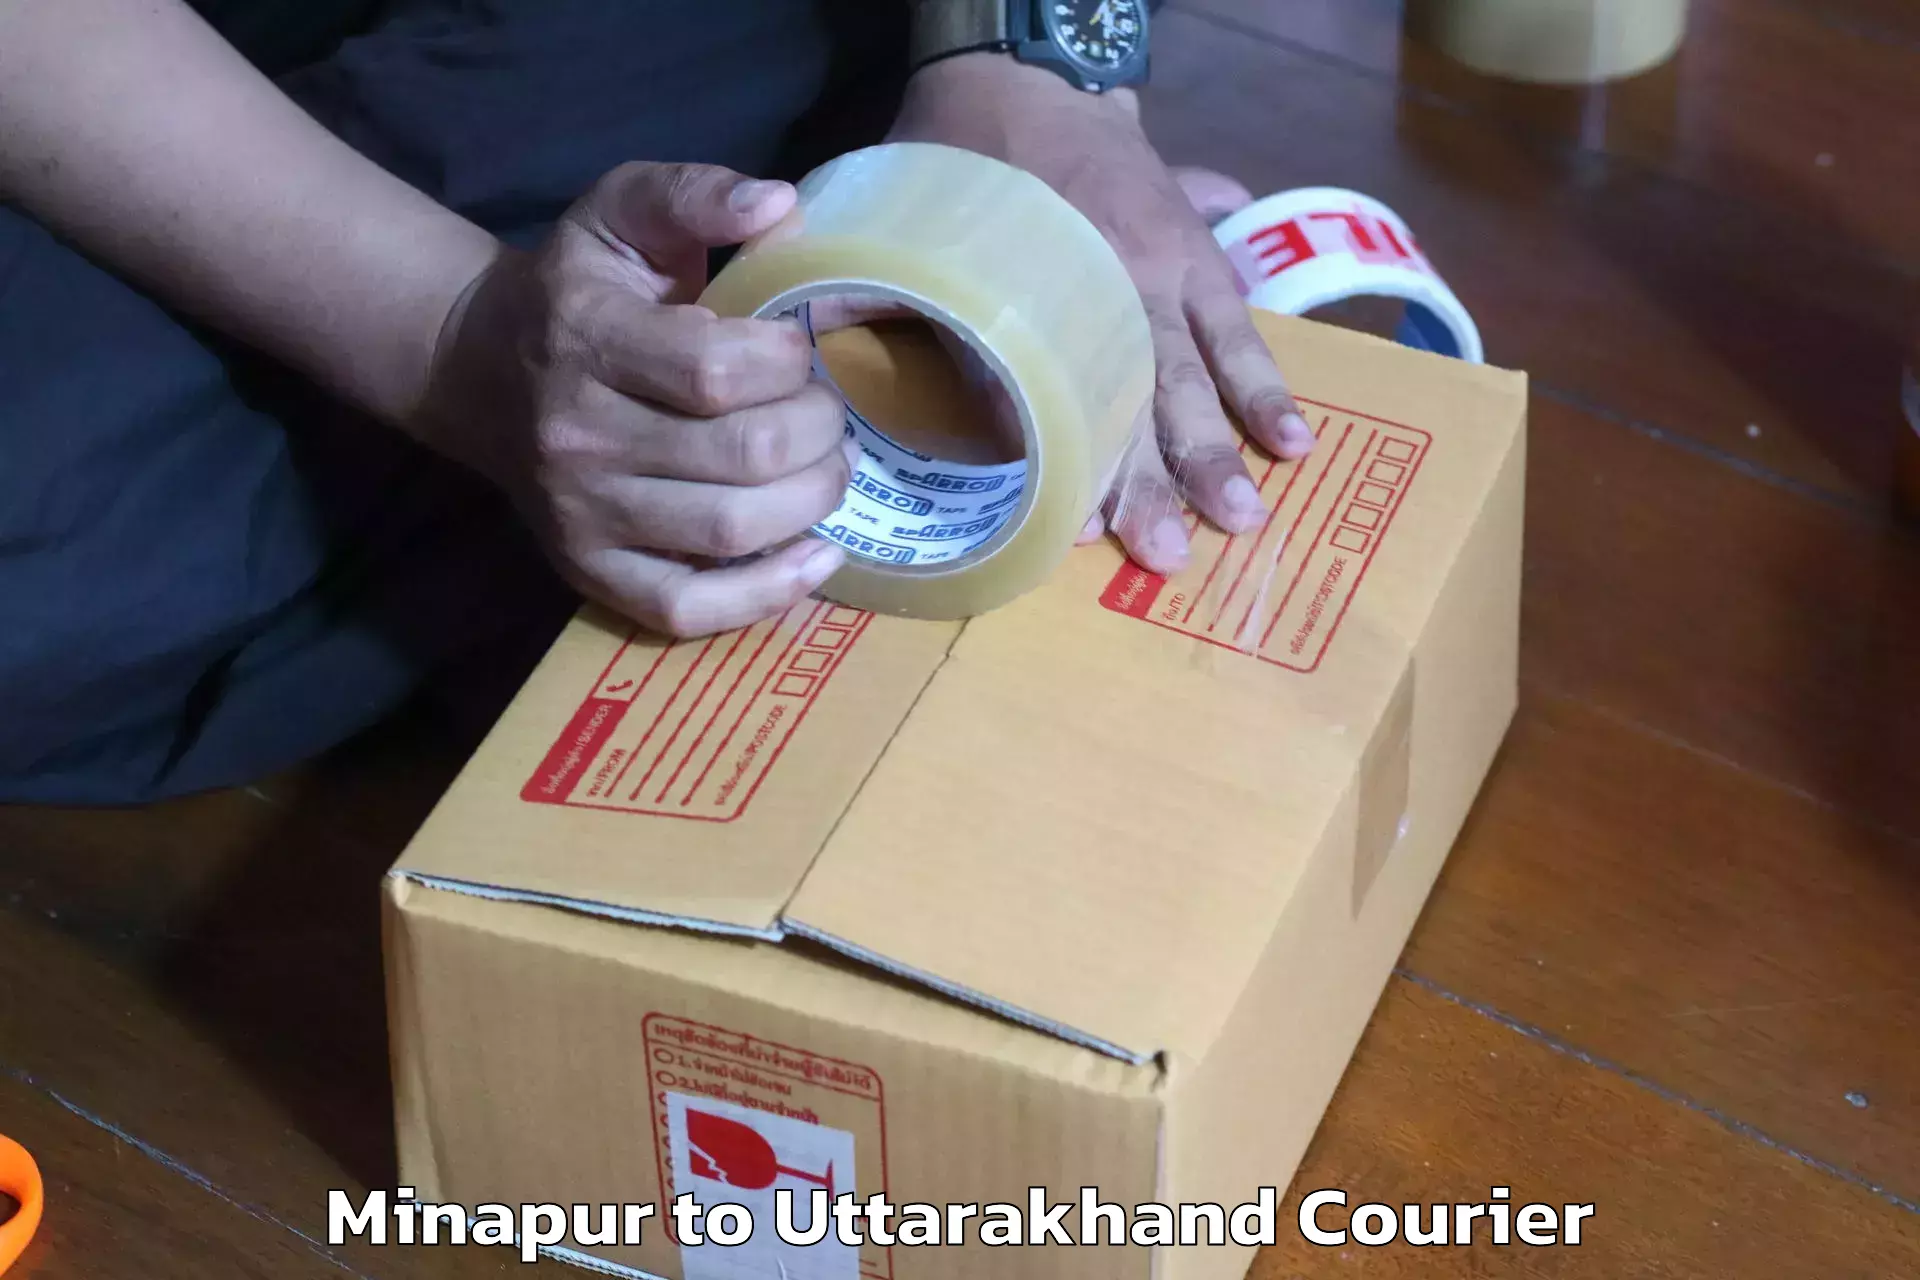 Professional movers and packers in Minapur to Rudraprayag